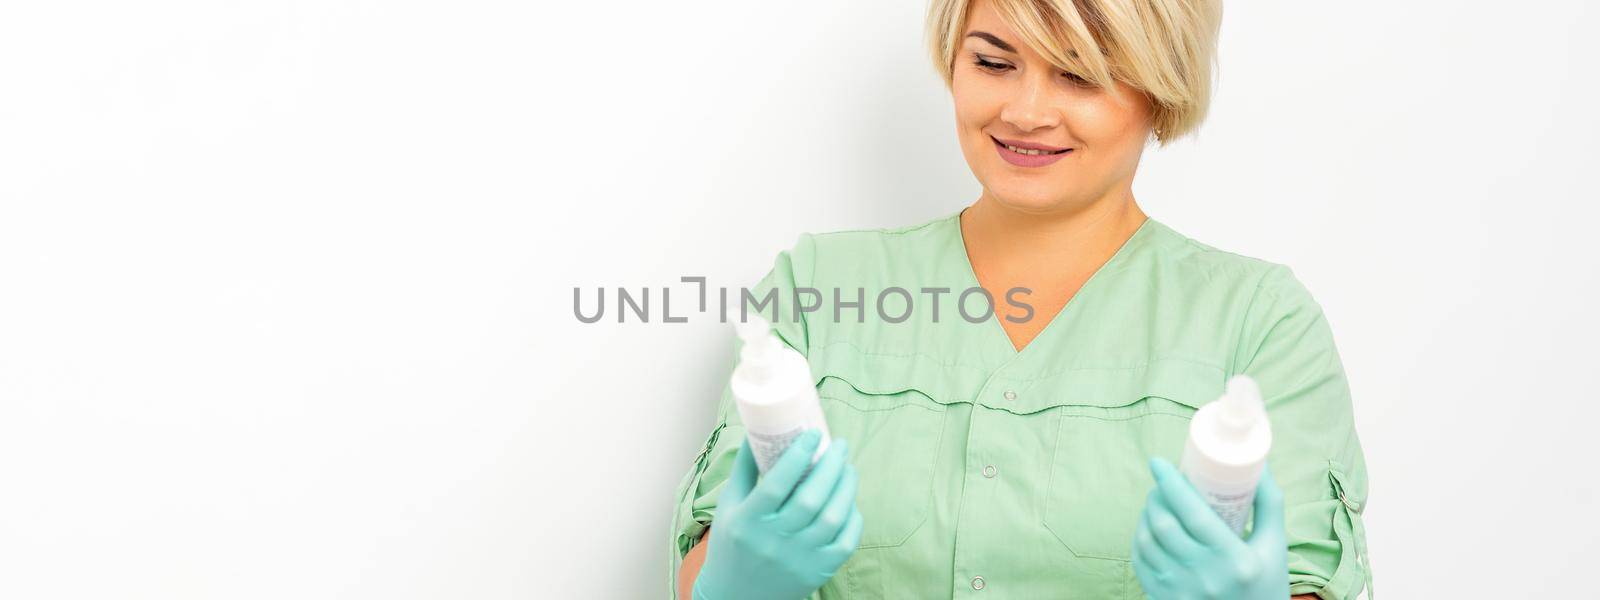 Cosmetics creams and skin care products in the hands of the female beautician smiling and standing over the white wall background